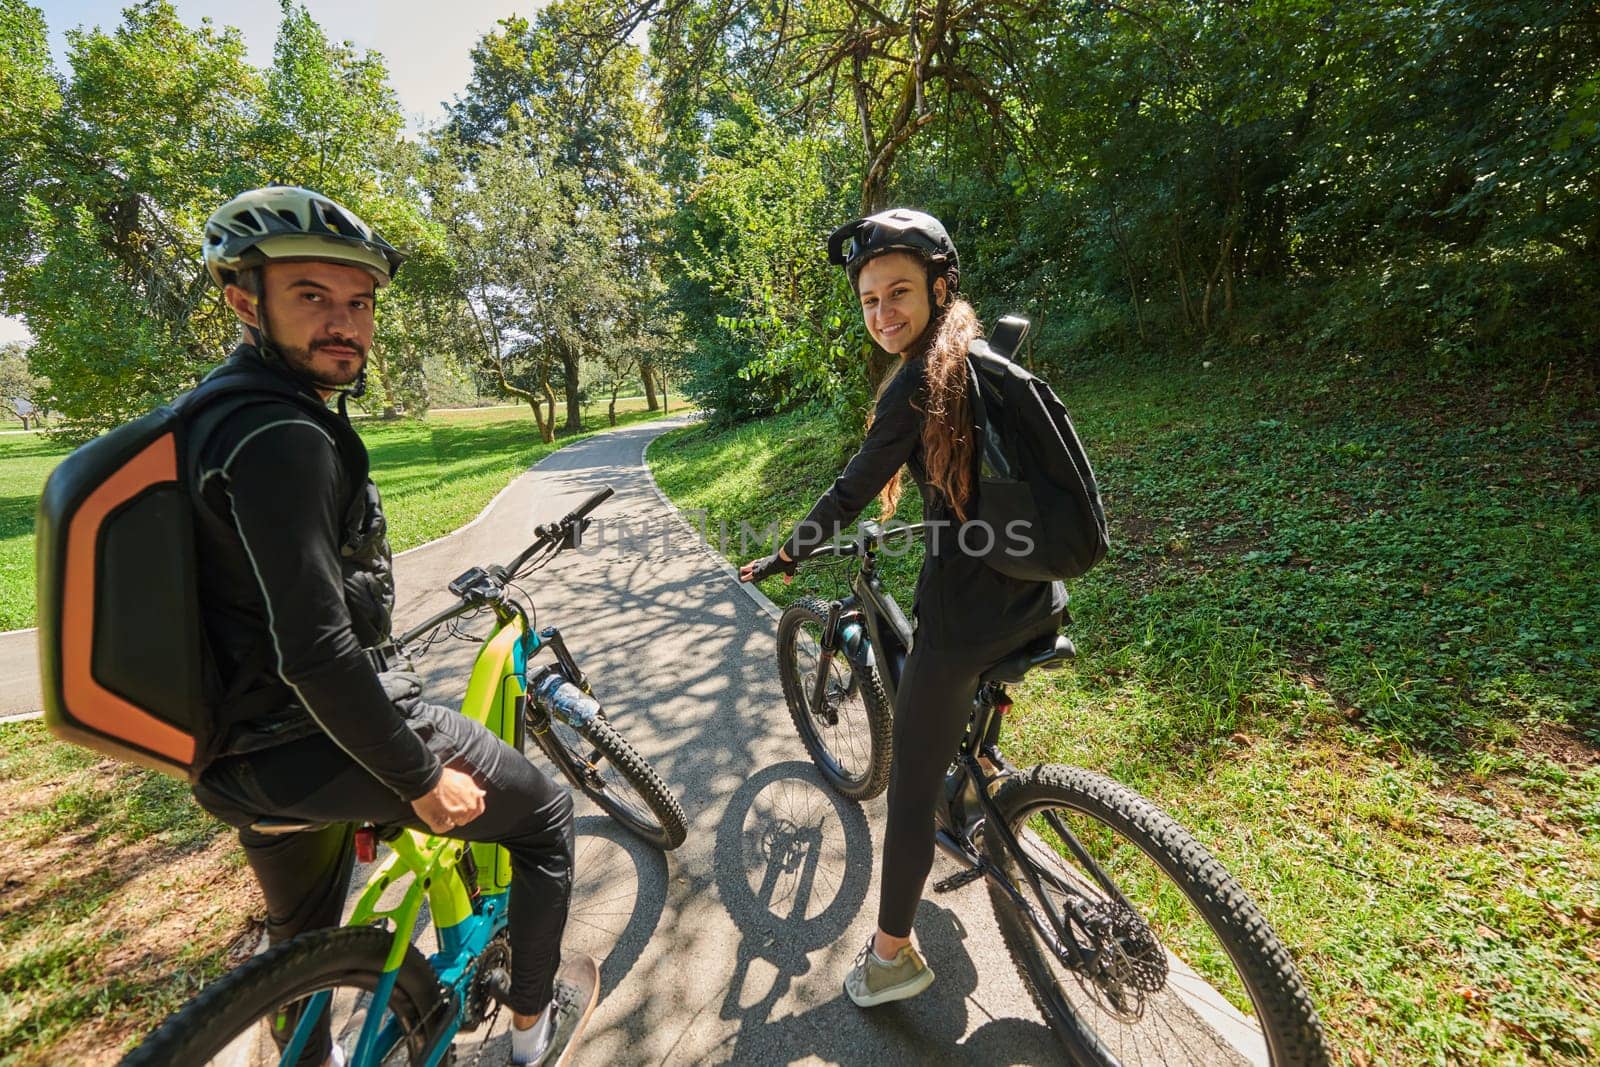 A sweet couple, adorned in cycling gear, rides their bicycles, their hands interlocked in a romantic embrace, capturing the essence of love, adventure, and joy on a sunlit path.